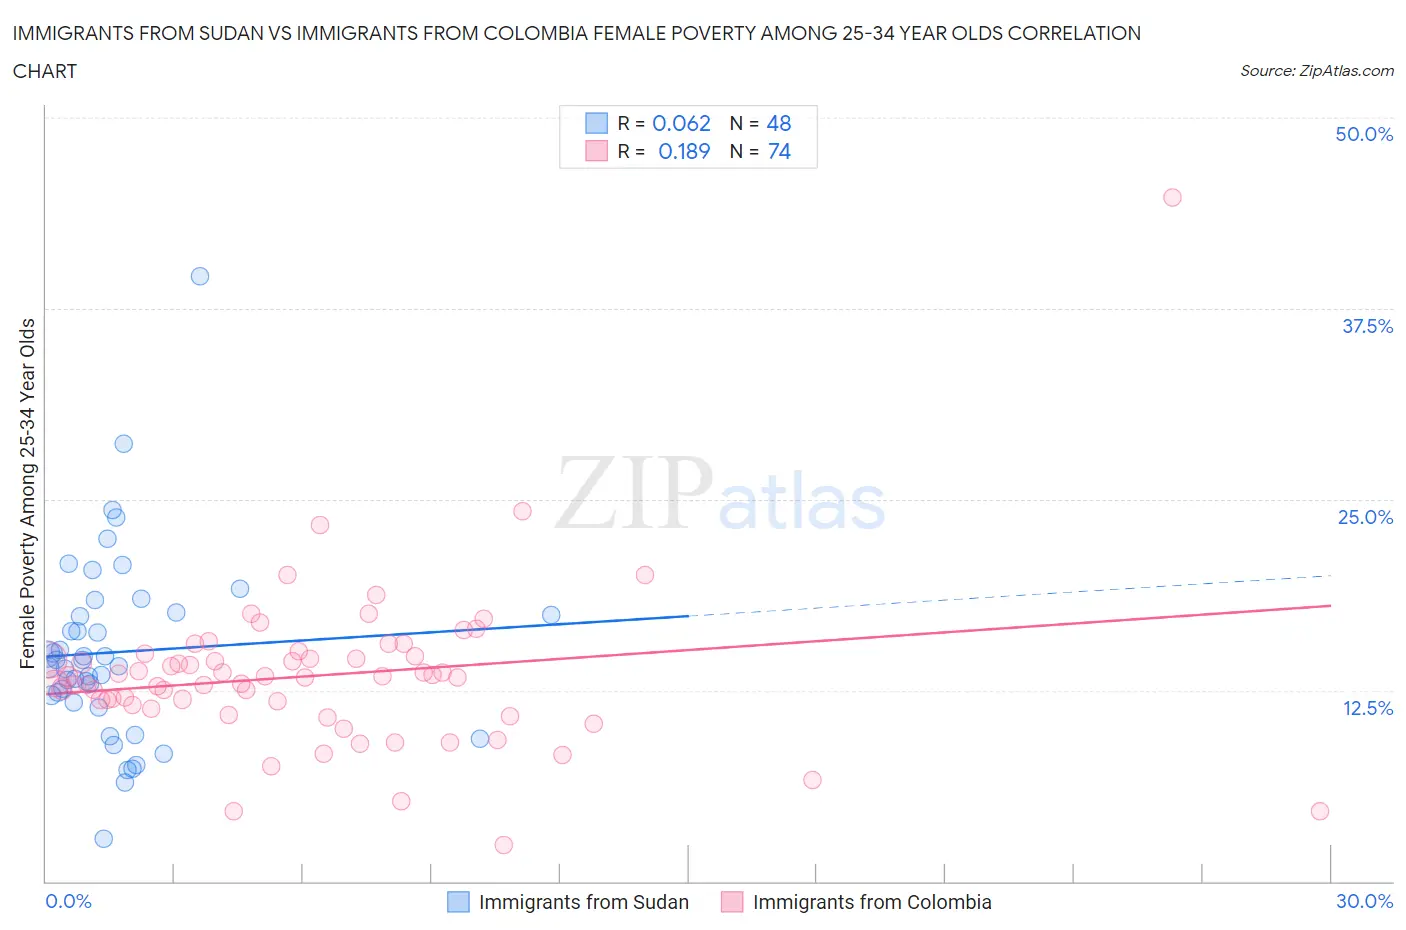 Immigrants from Sudan vs Immigrants from Colombia Female Poverty Among 25-34 Year Olds